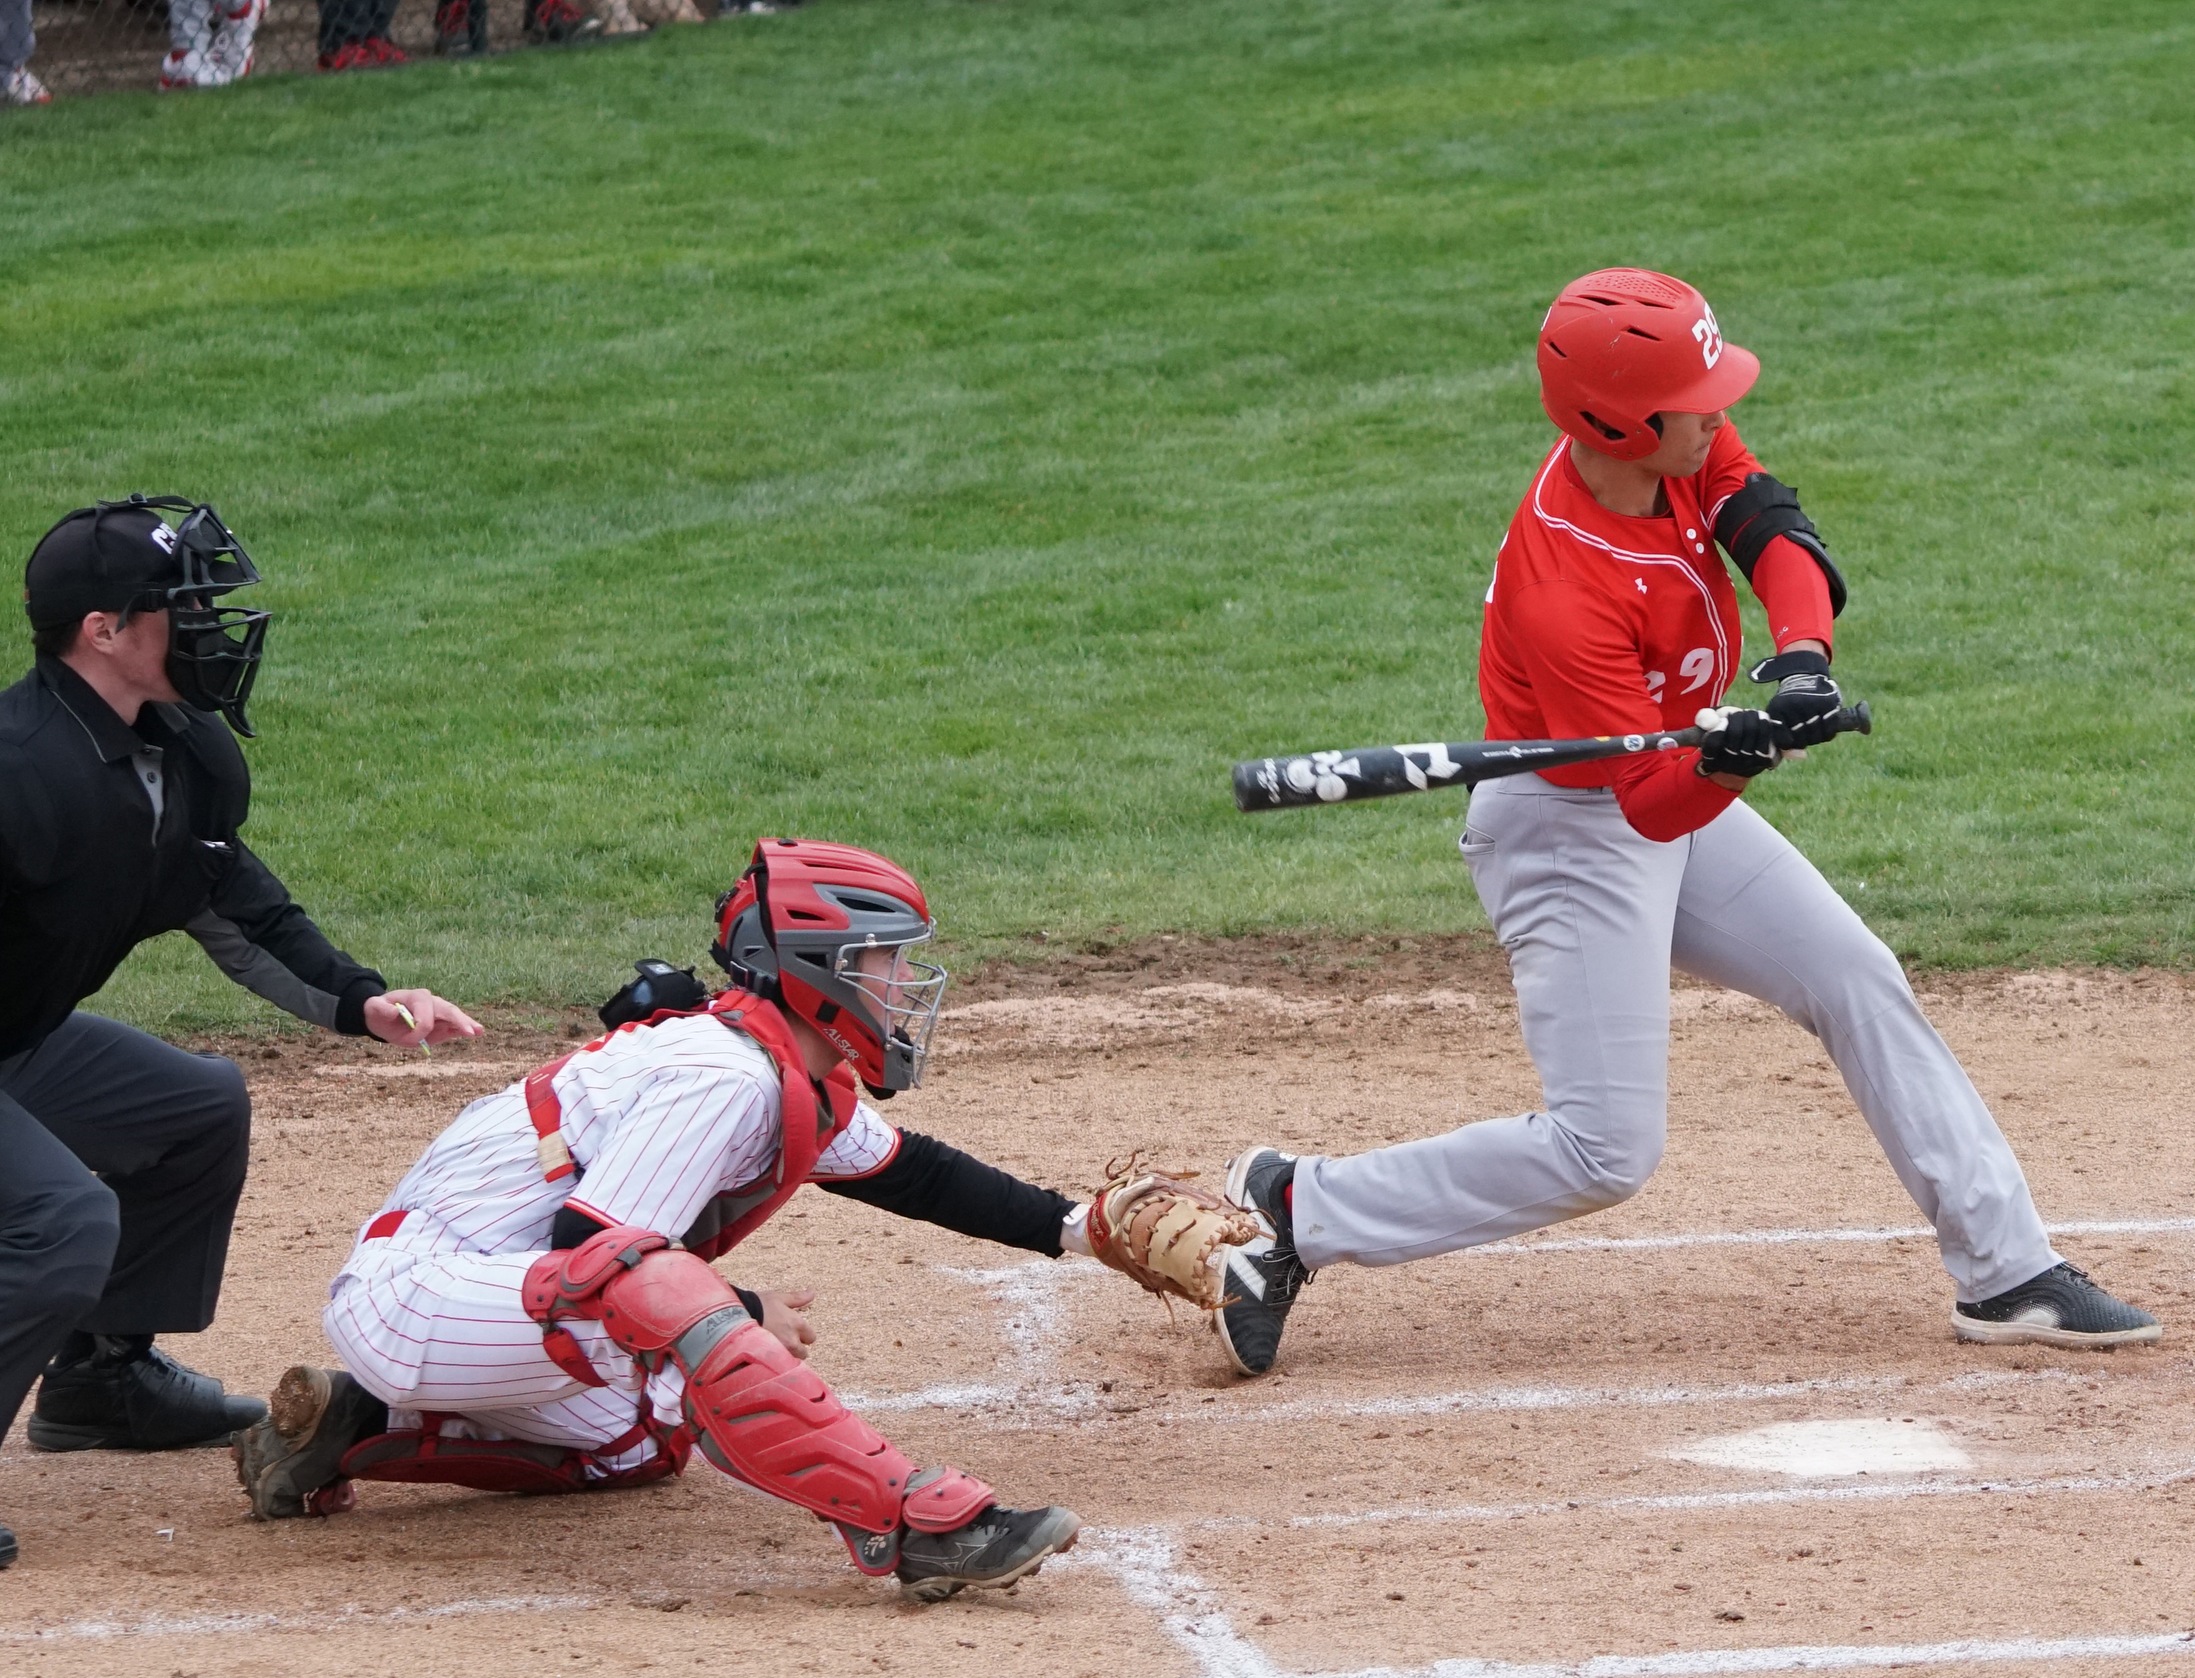 Sophomore Alex Nemunaitis swings at a pitch during Wednesday's game at Otterbein. Nemunaitis hit one of the Tigers' two home runs in the game. | Photo courtesy of Otterbein Athletics Communications